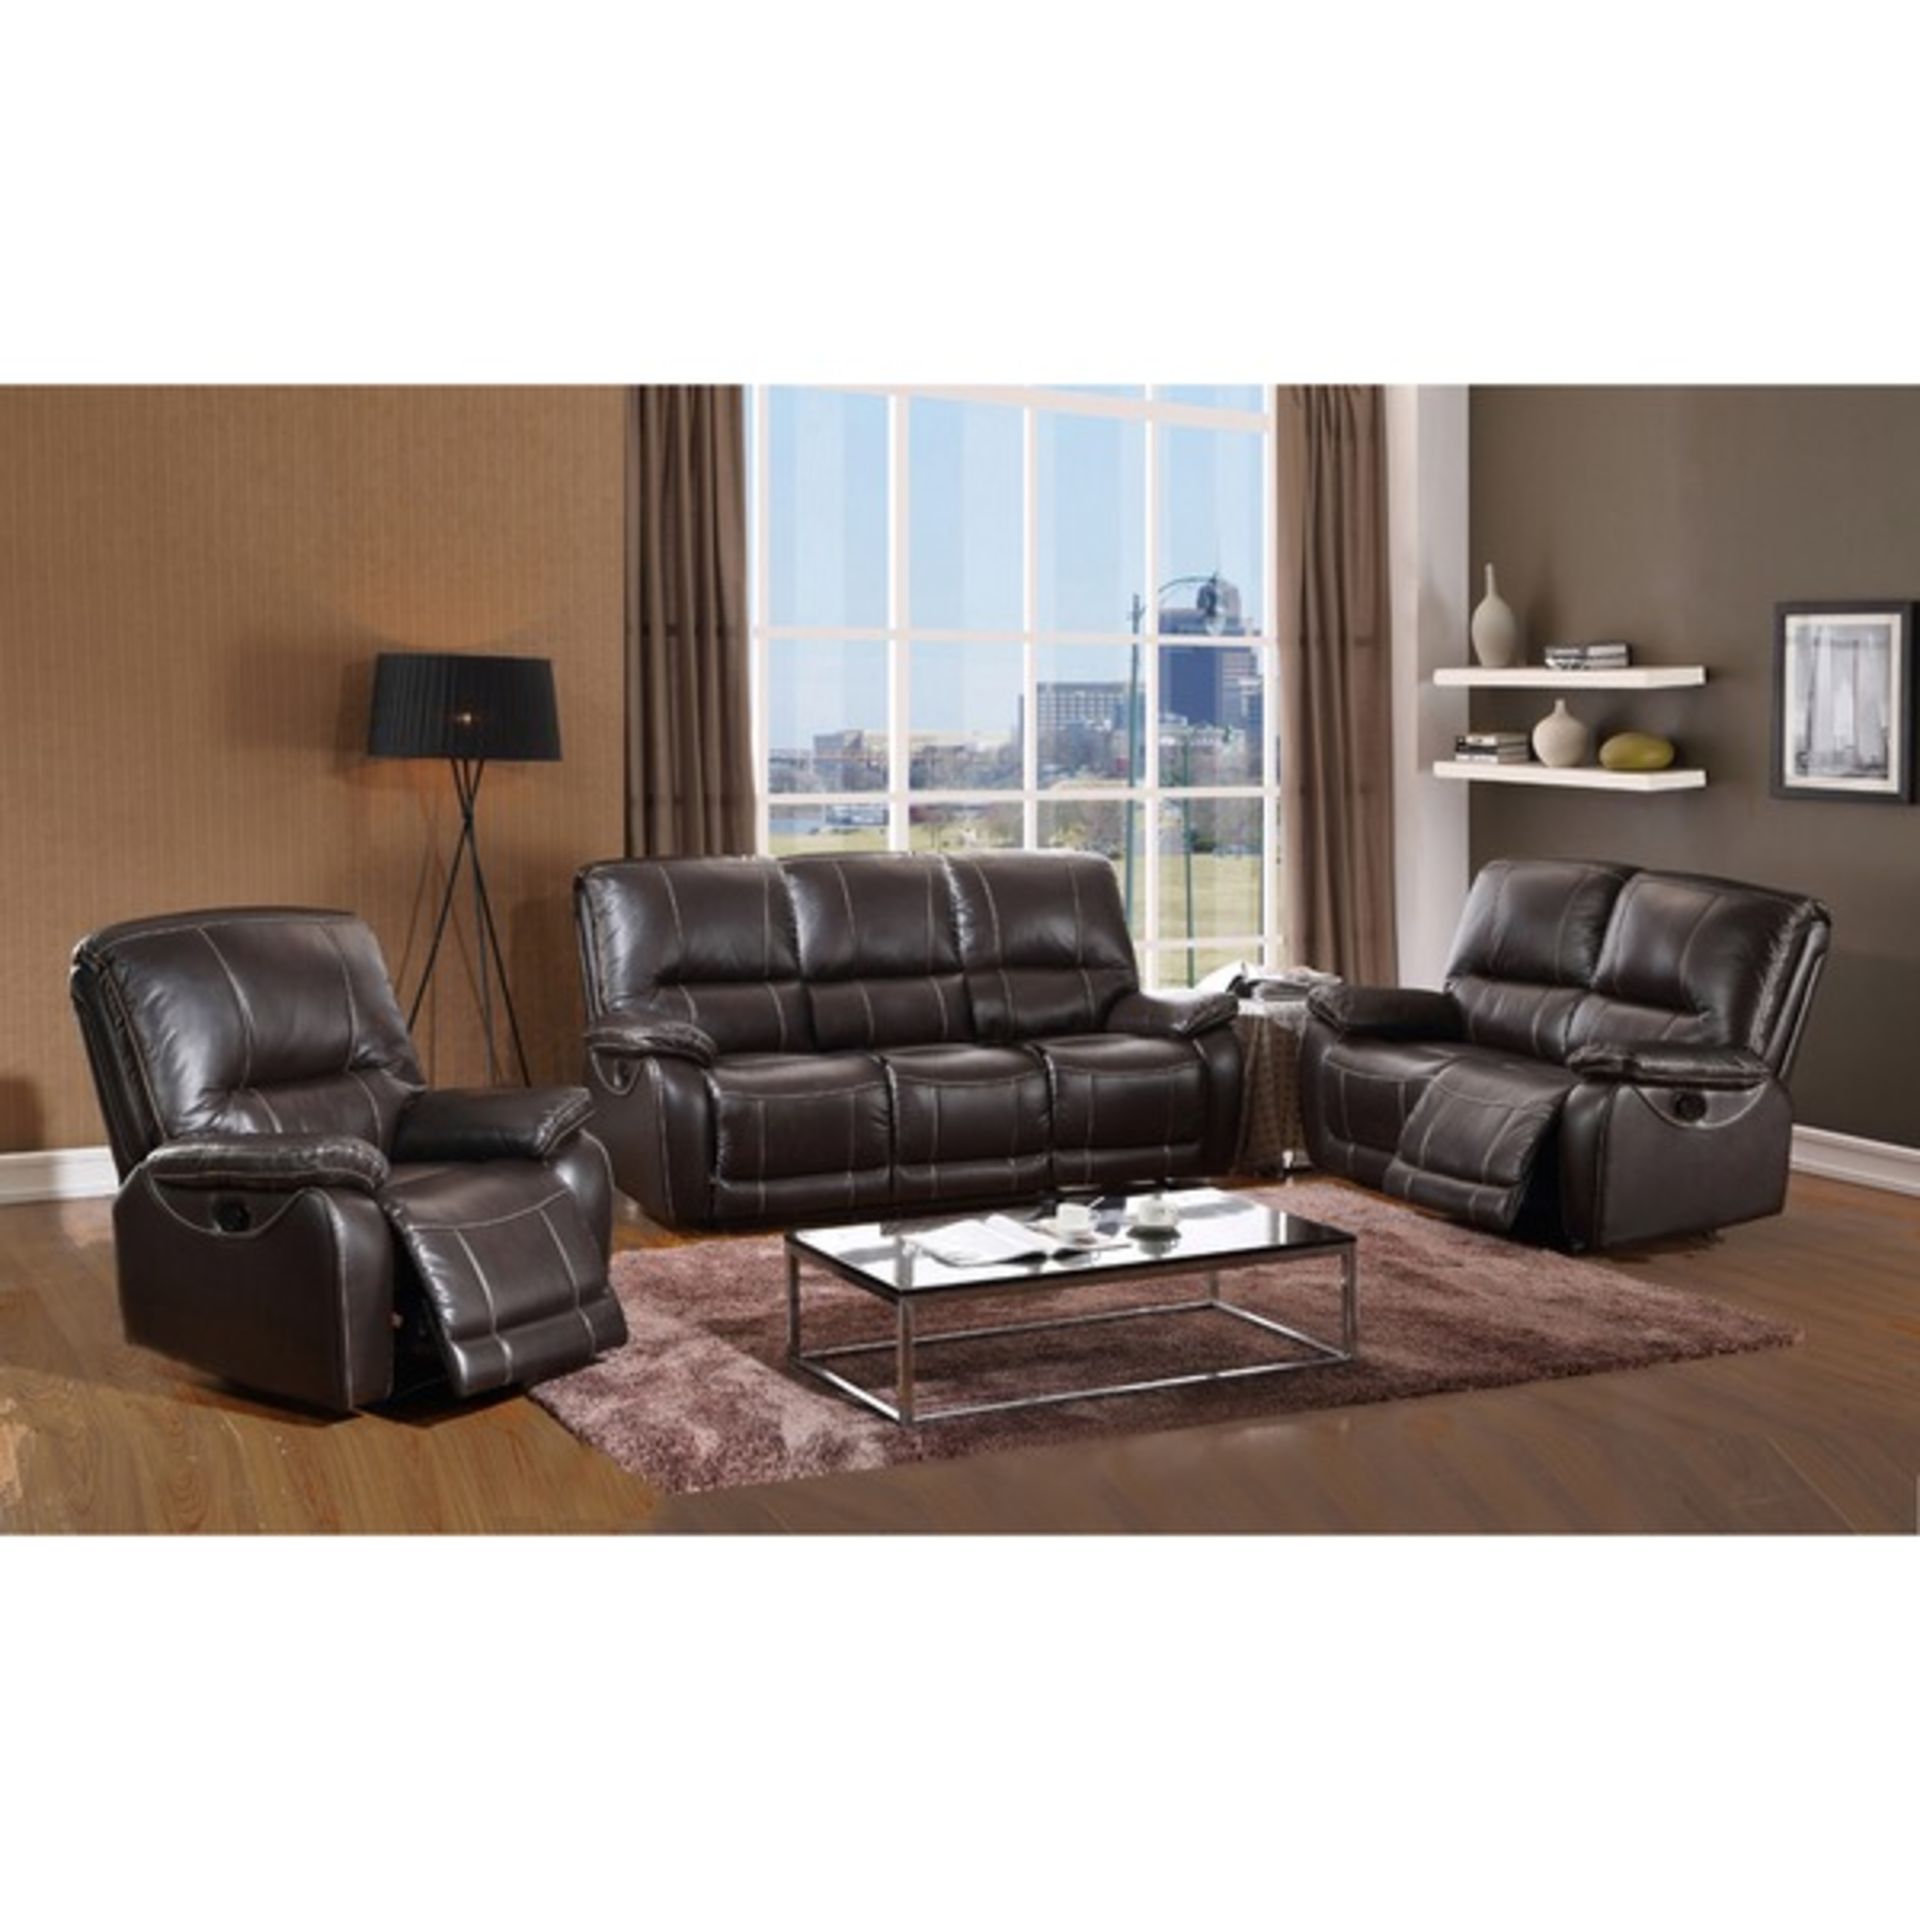 Brand new direct from the manufacturers Warrier 3 seater plus 2 arm chairs leather air fabric